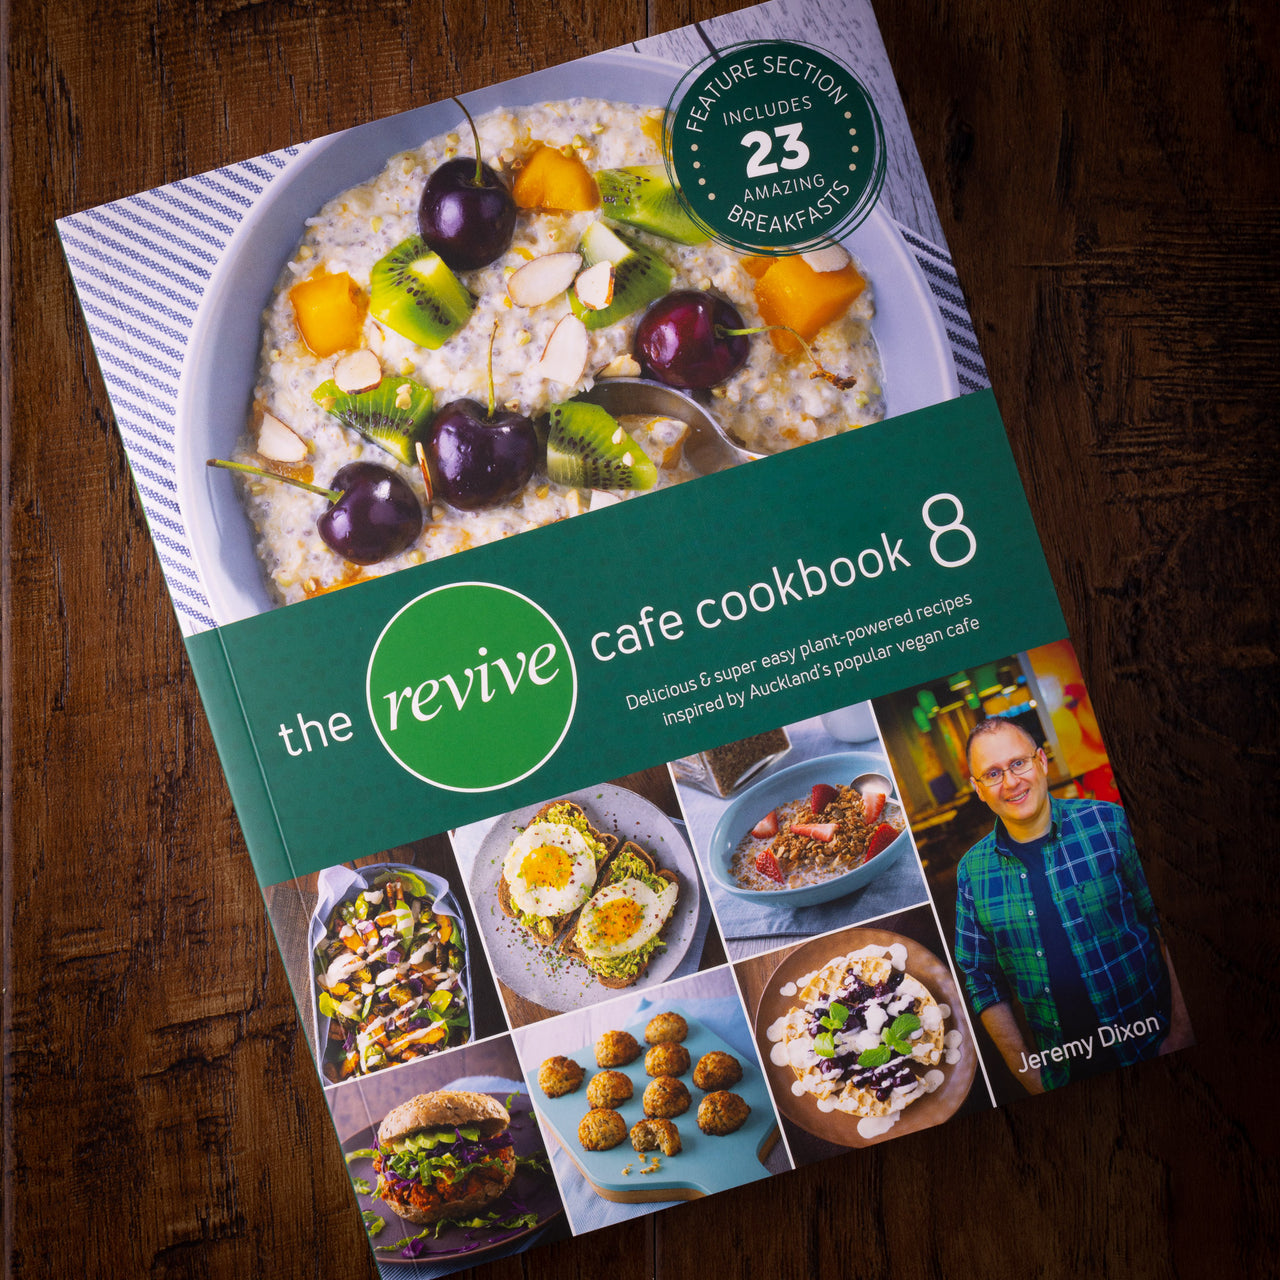 New Cookbook Launch Just In Time For Christmas!